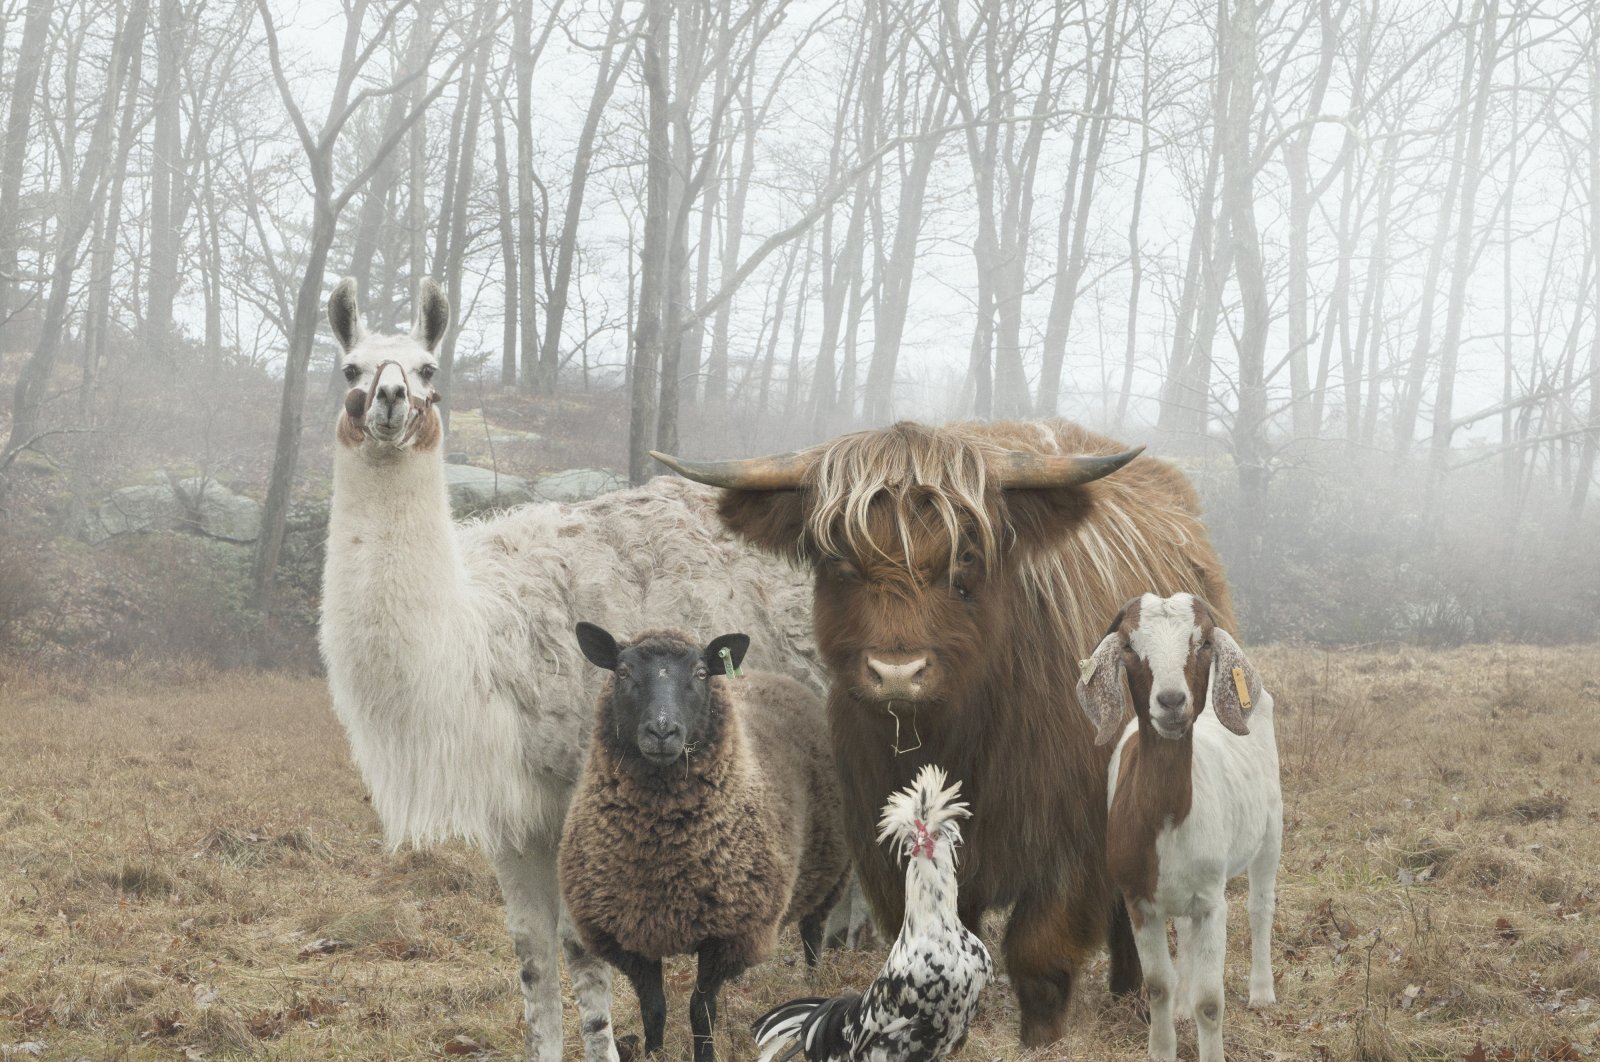 &quot;The Farm Family Project&quot; by Rob MacInnis. (Photo courtesy of 212 Photography Istanbul)